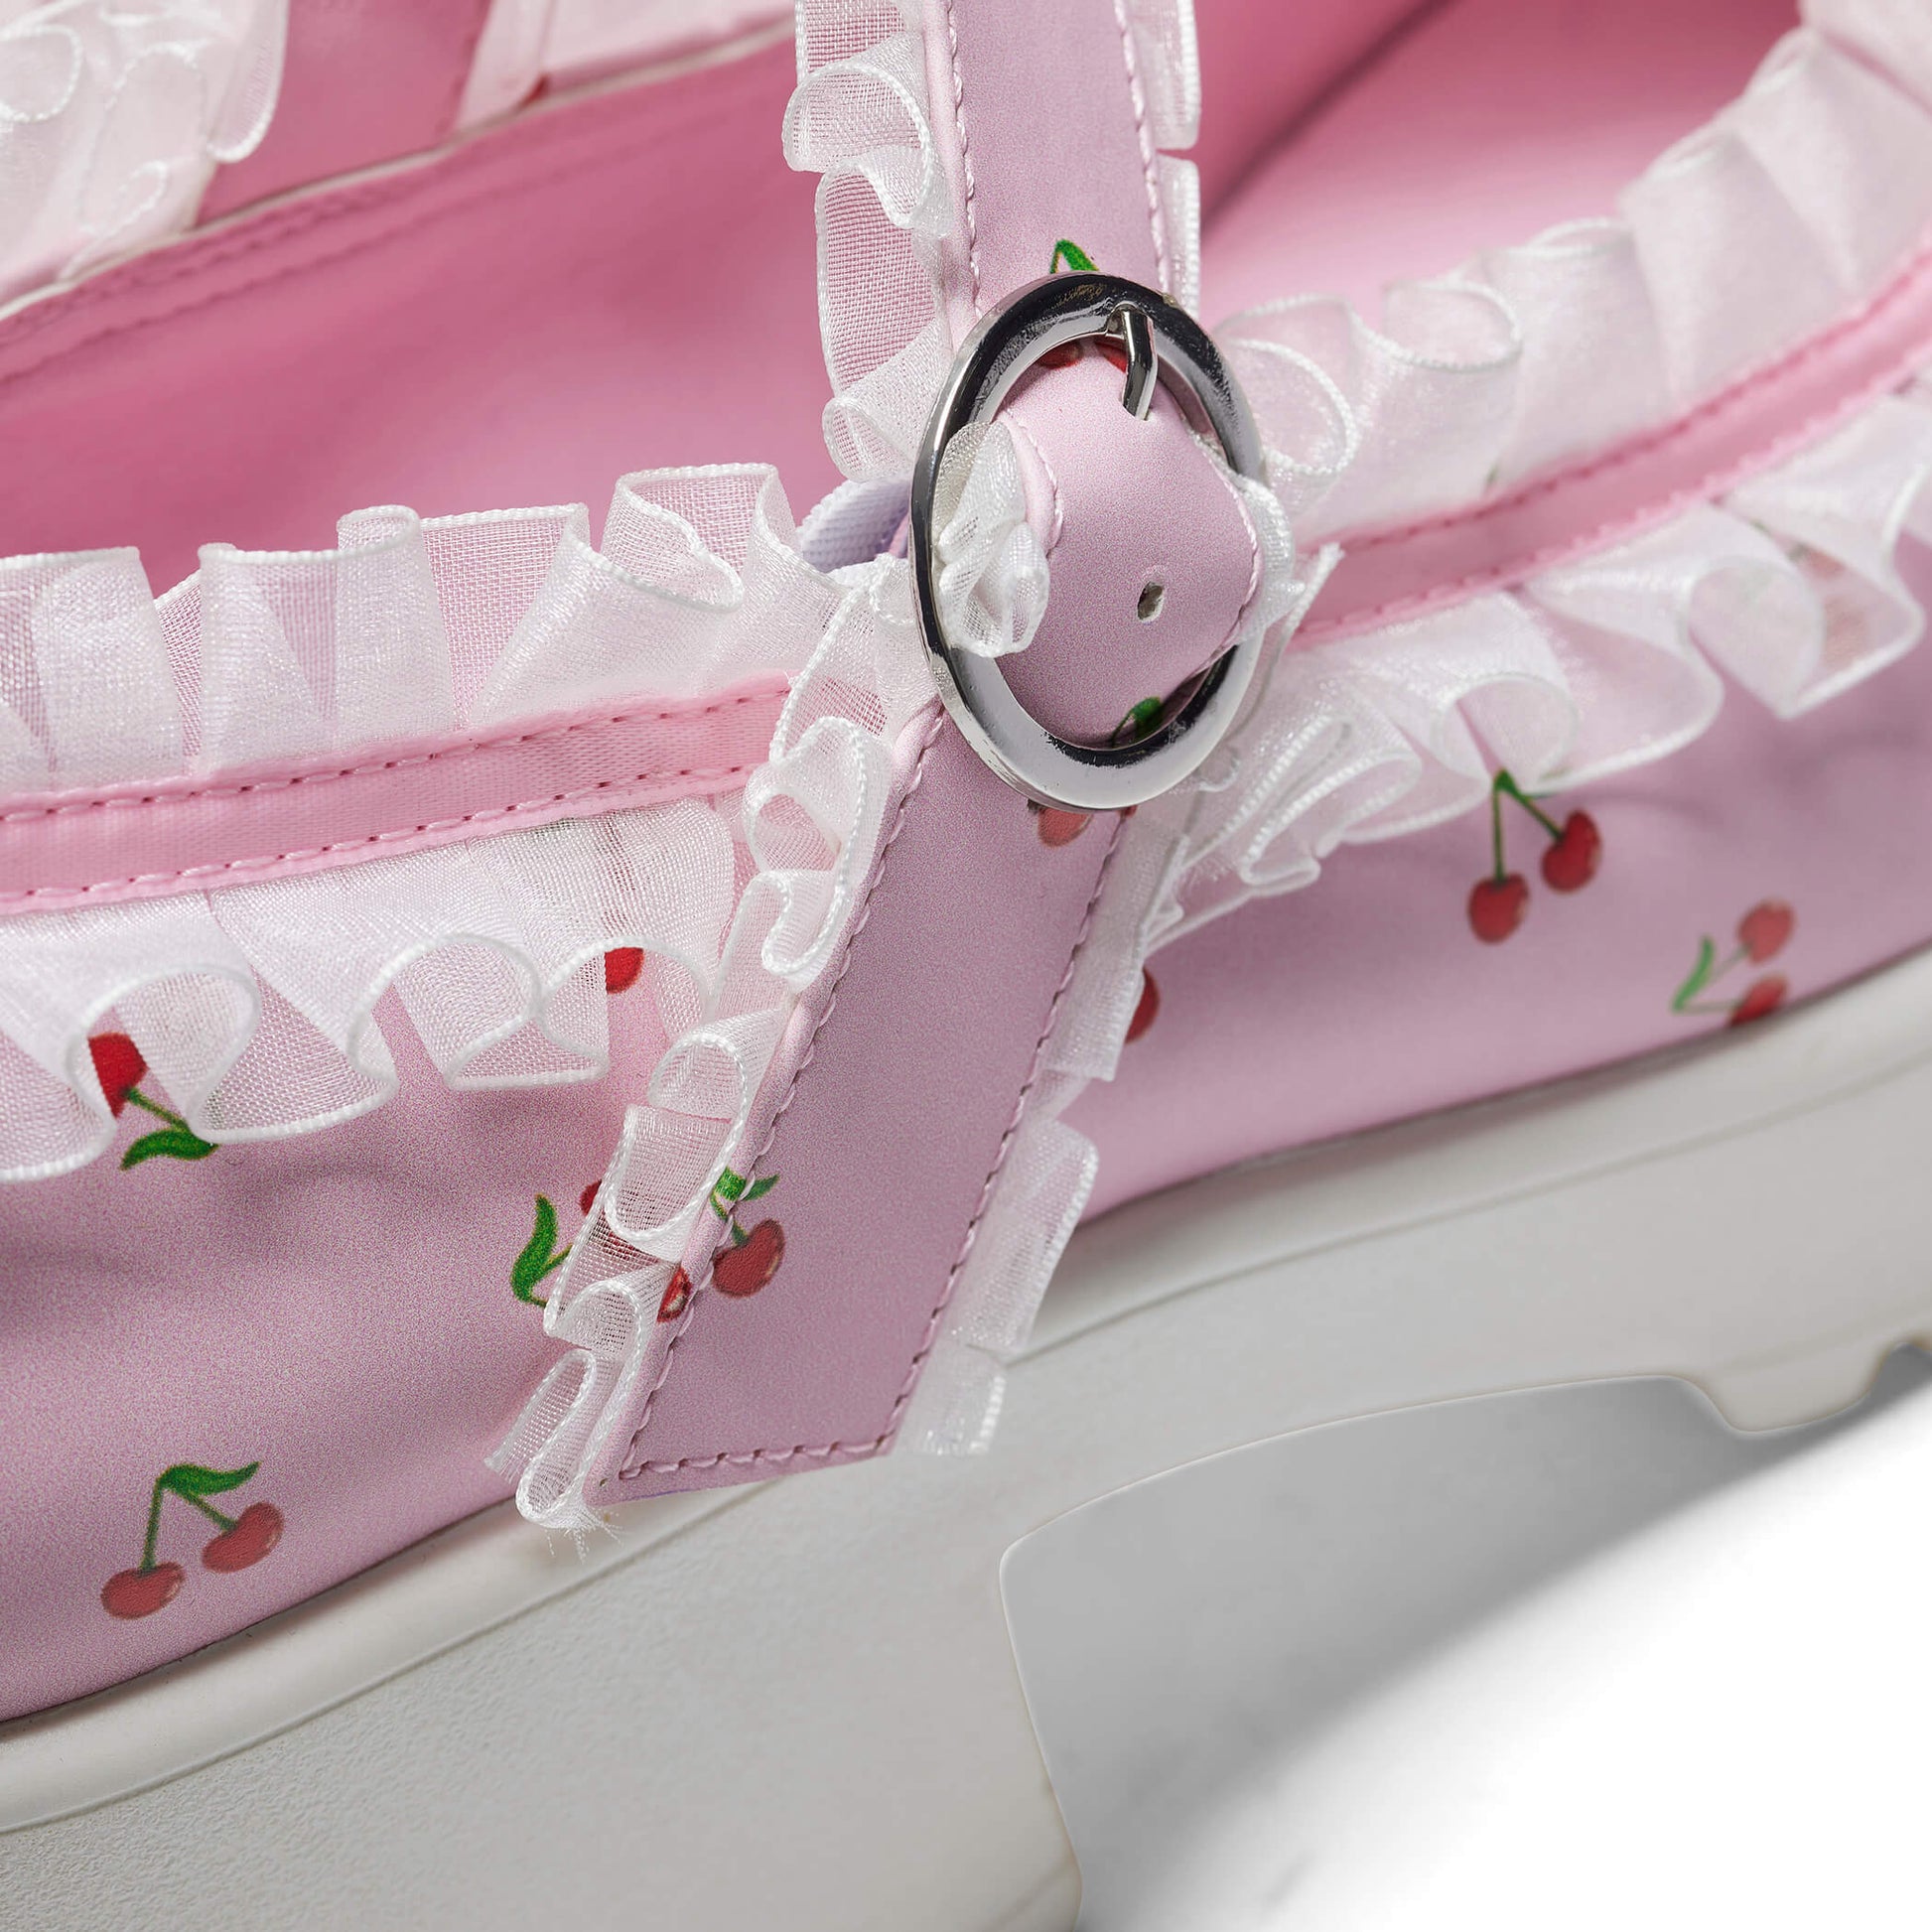 Tira Mary Janes Shoes 'Pink Cherry Bakewell Edition' - Mary Janes - KOI Footwear - Pink - Buckle Detail